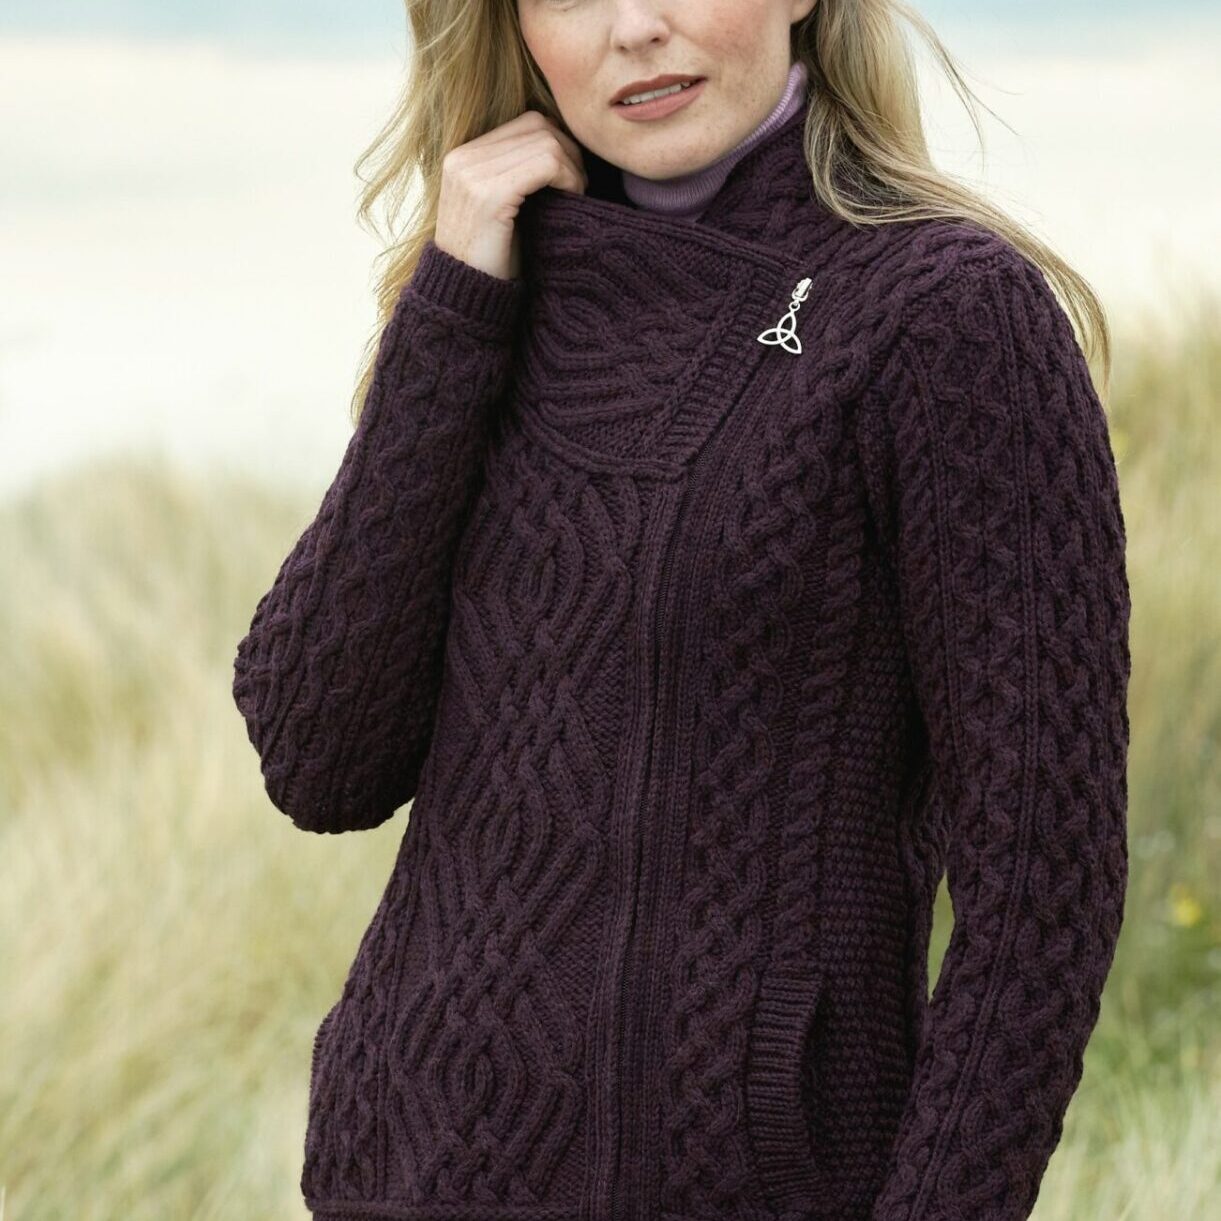 A woman in a purple sweater standing on top of a beach.